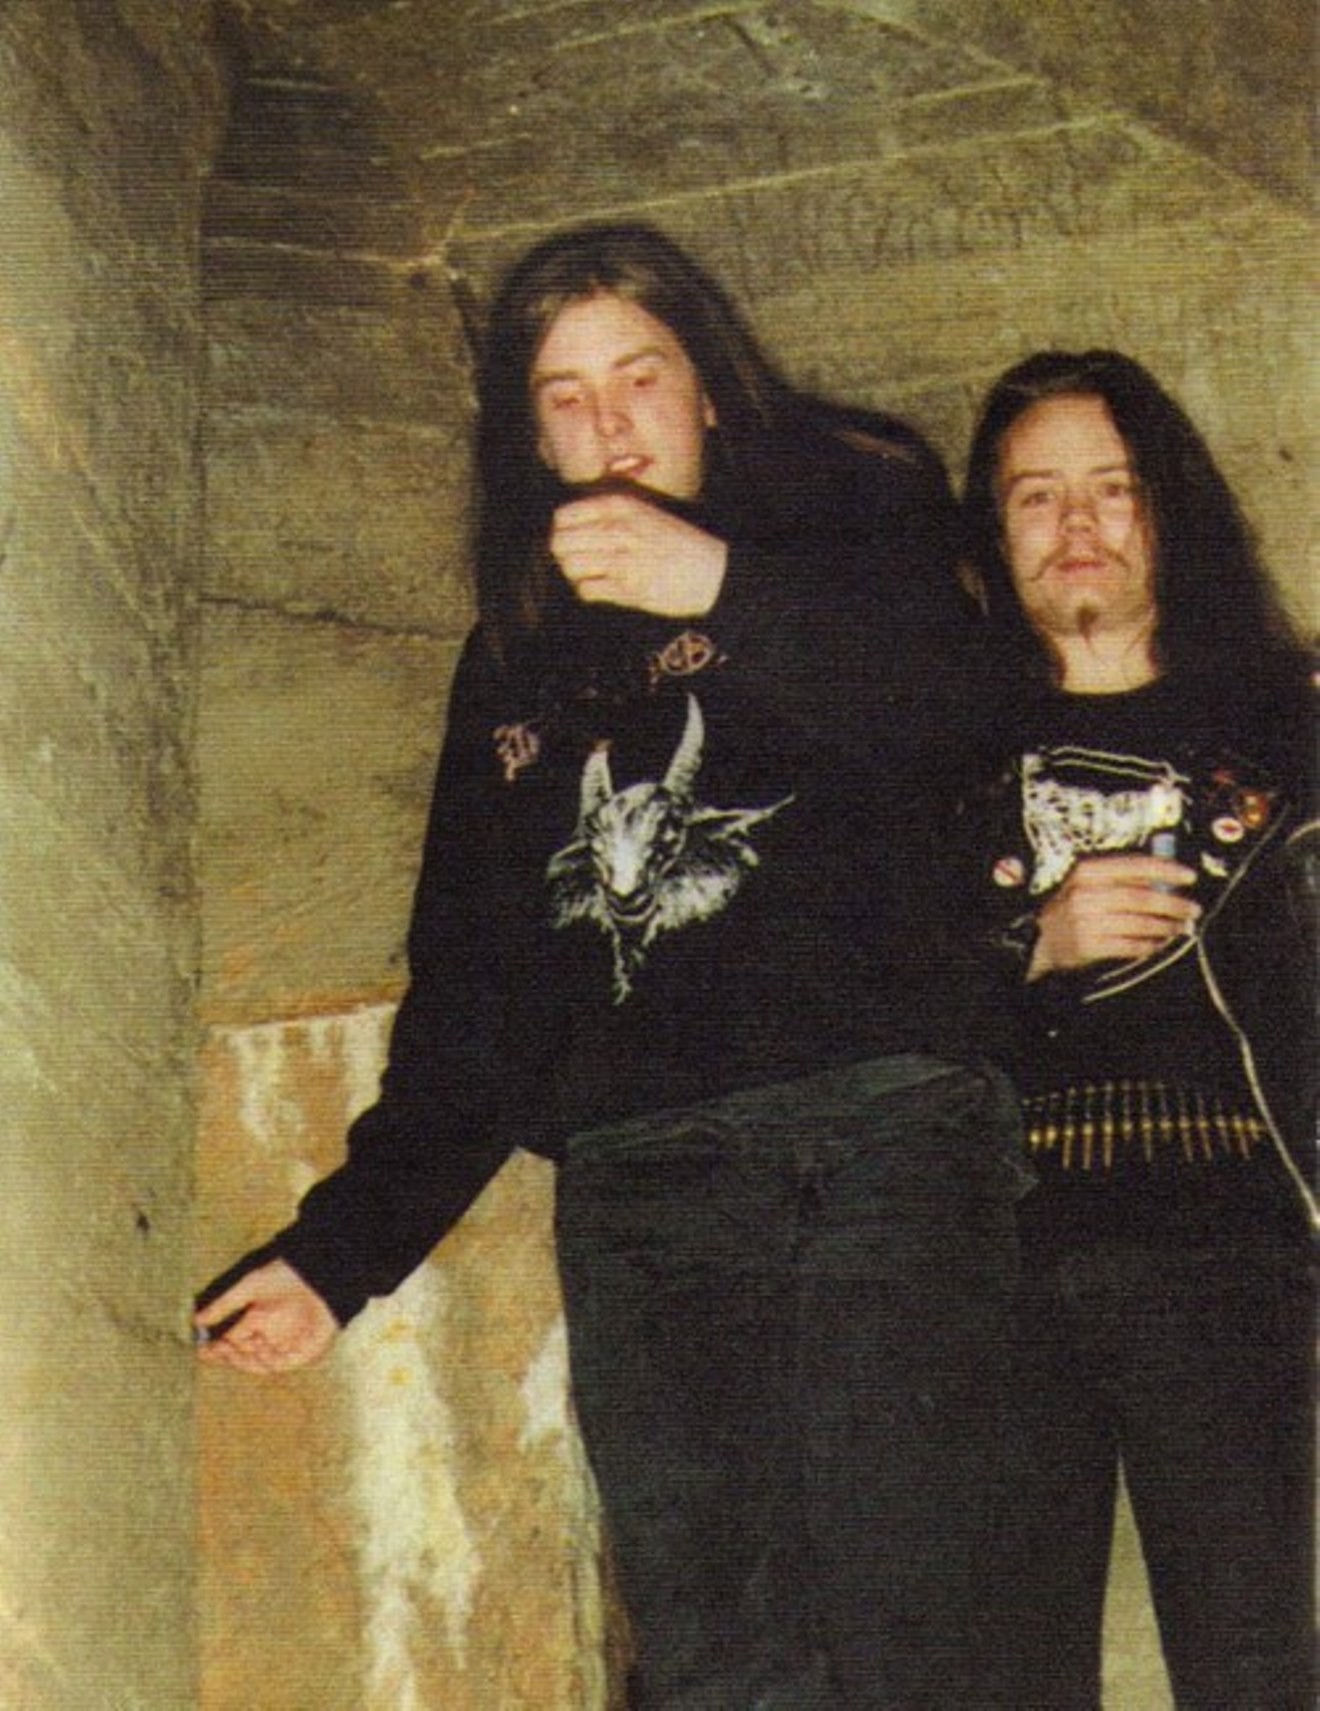 Lords of Chaos. Euronymous